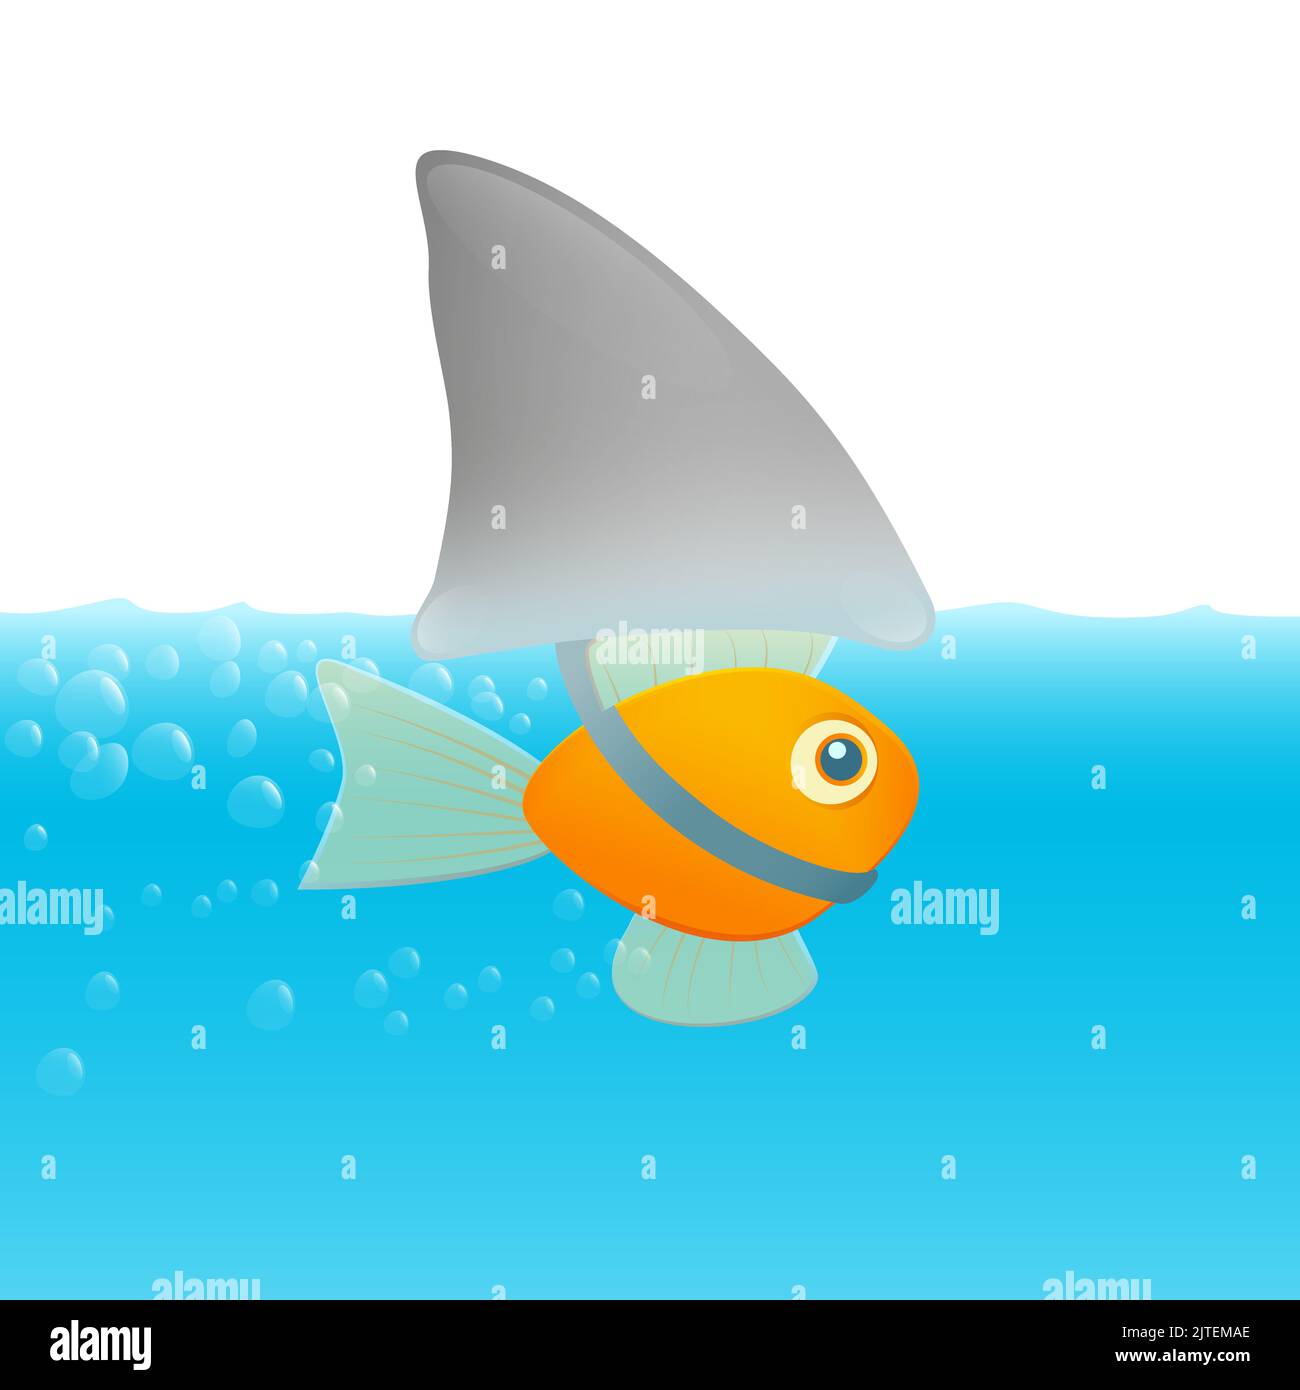 Goldfish under the guise of a fake shark fin, symbol for deception, bluff, trick, sham, disguise and illusion - comic illustration. Stock Photo